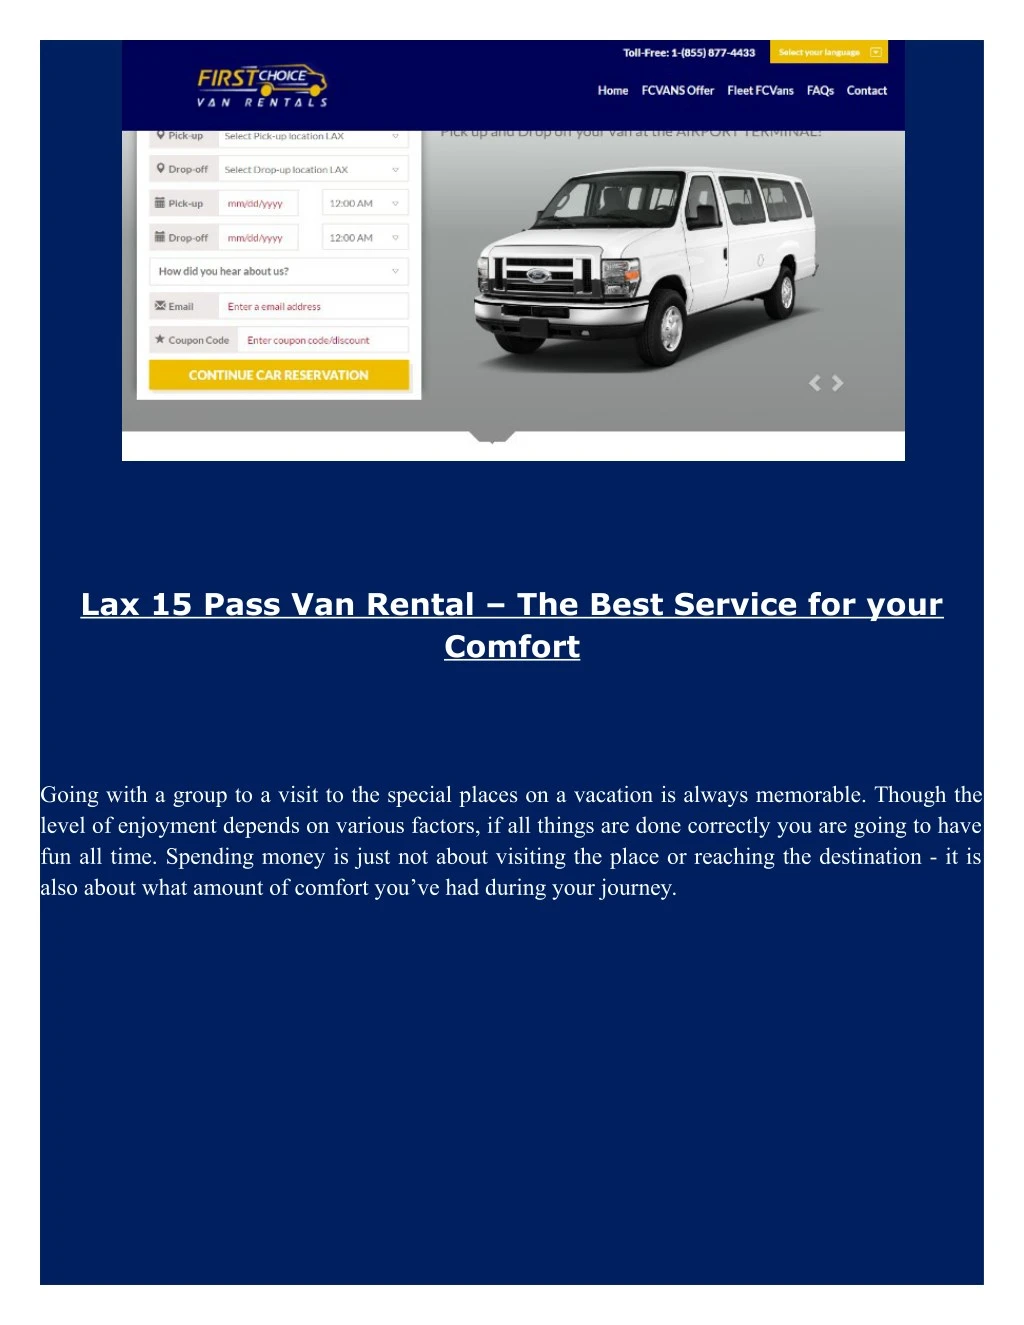 lax 15 pass van rental the best service for your